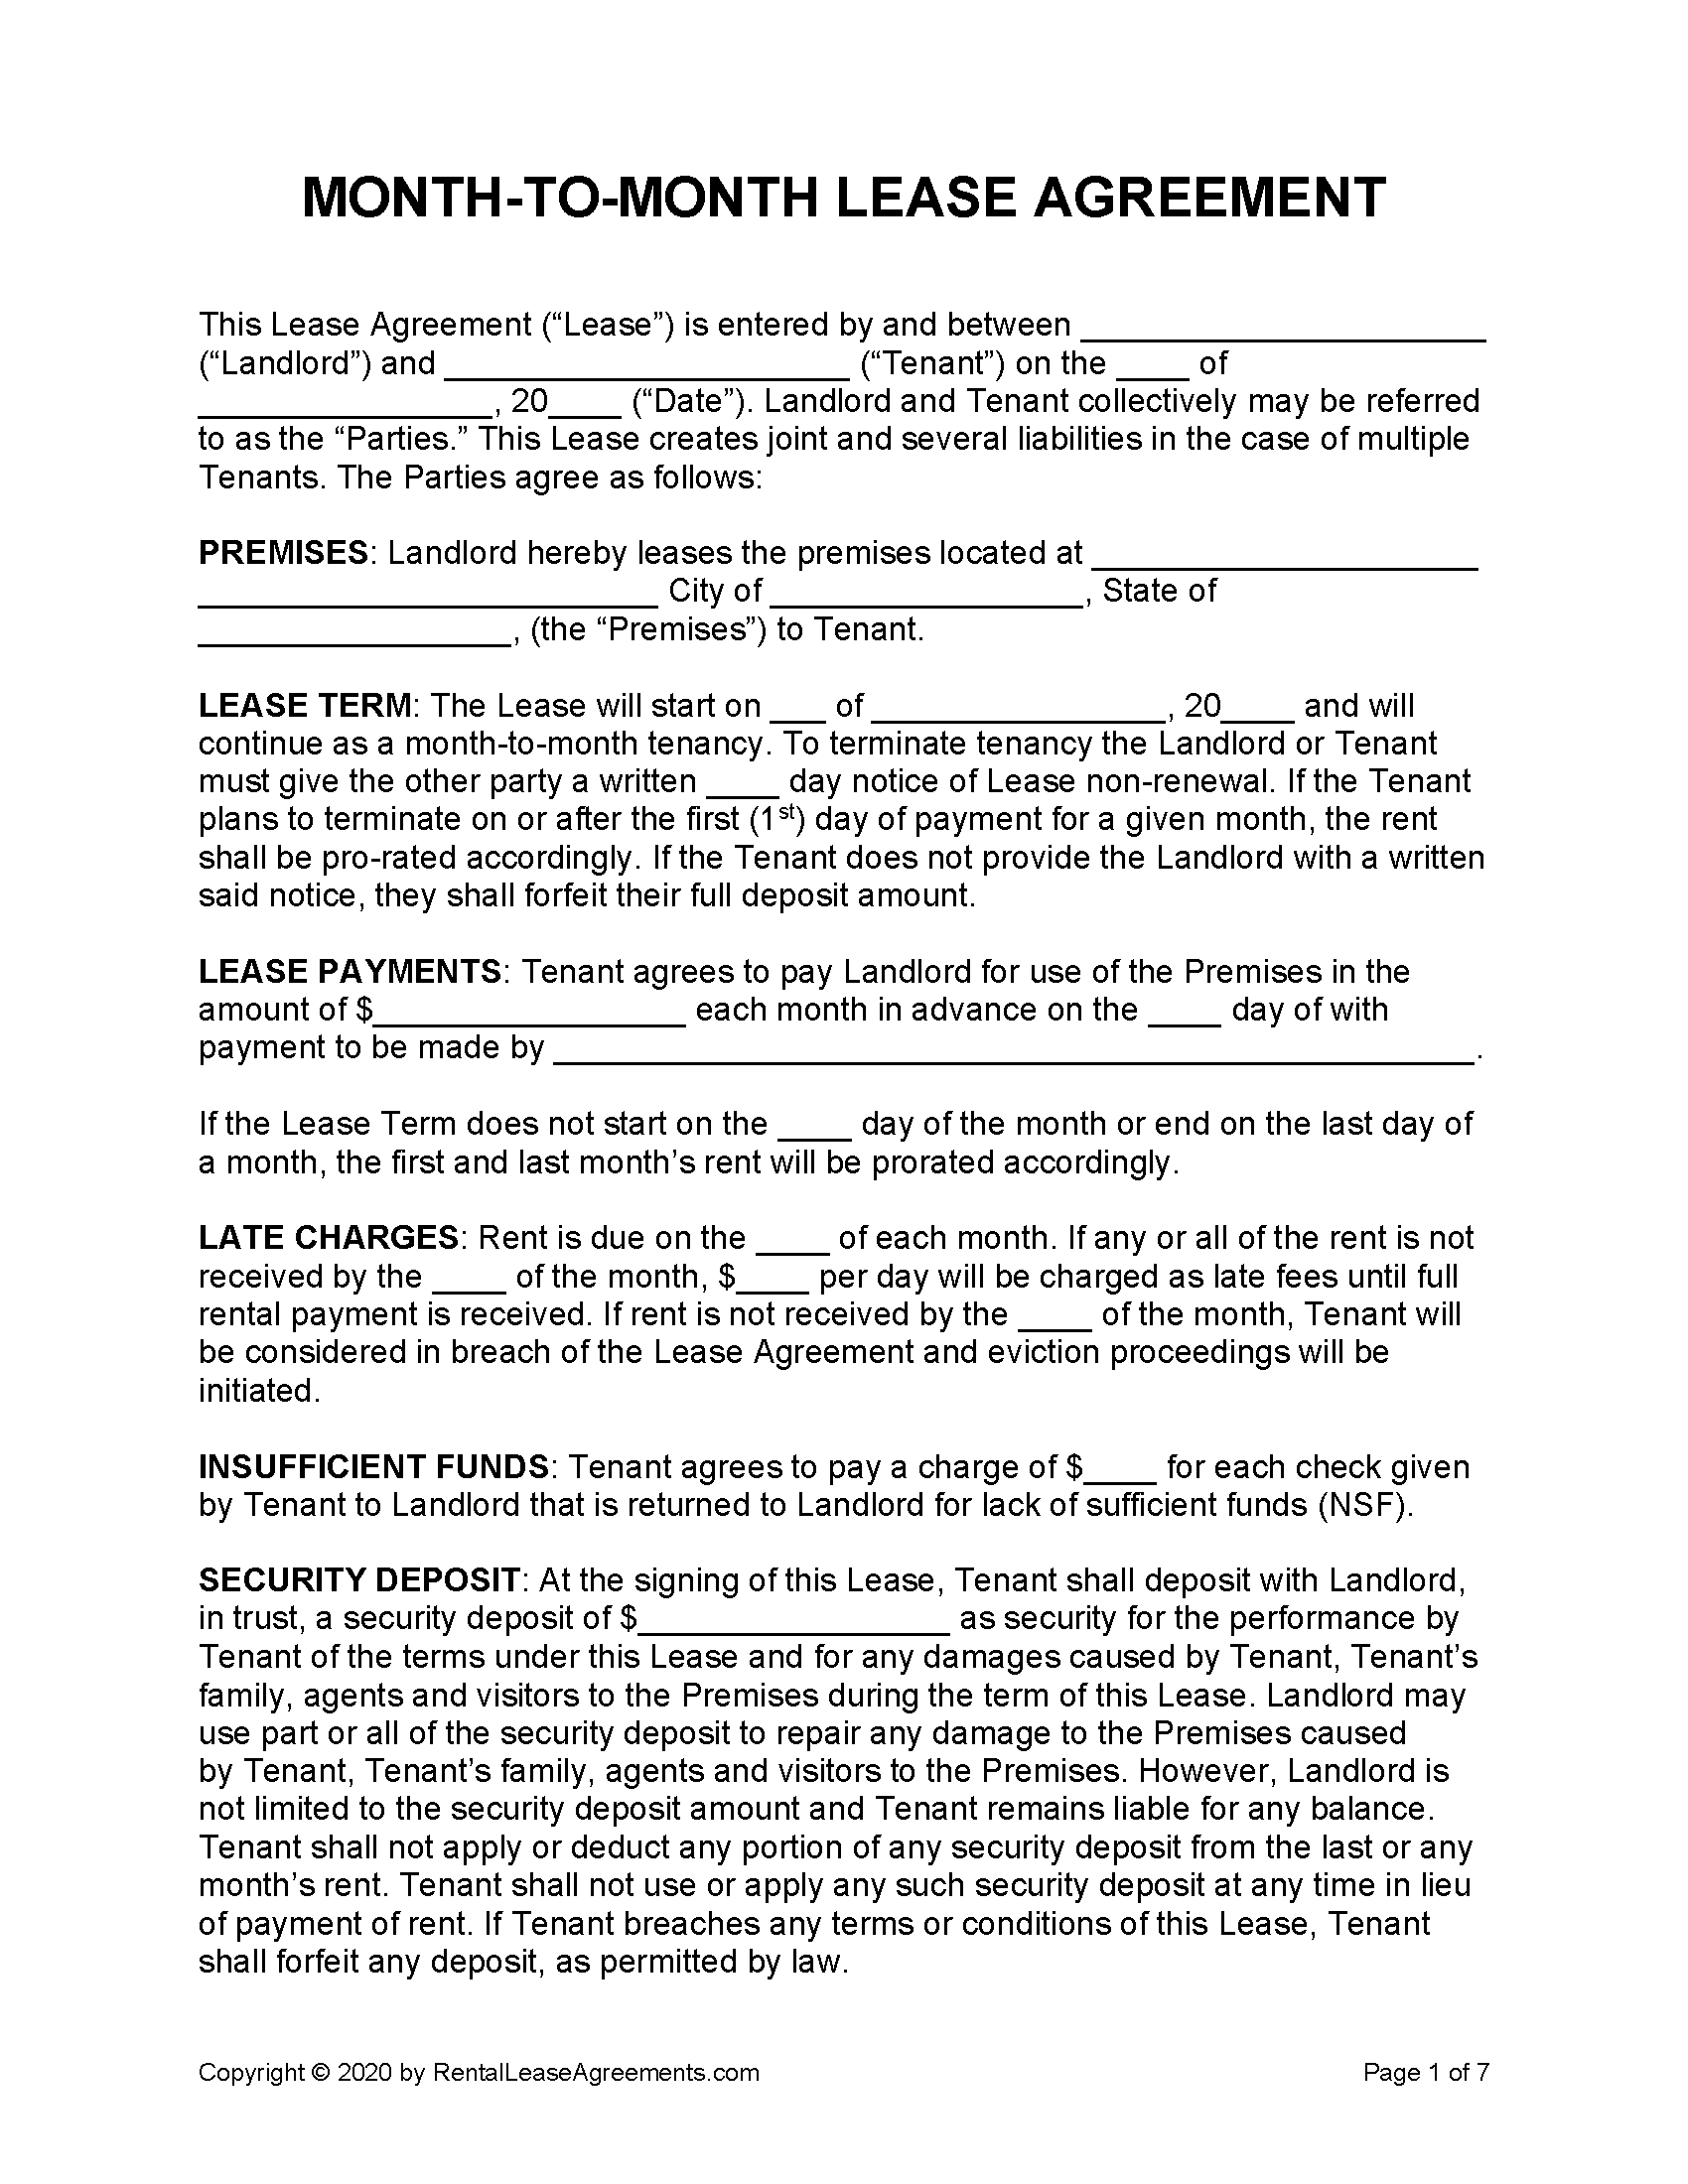 Free Month-to-Month Rental Agreement  PDF - Word Inside multiple tenant lease agreement template